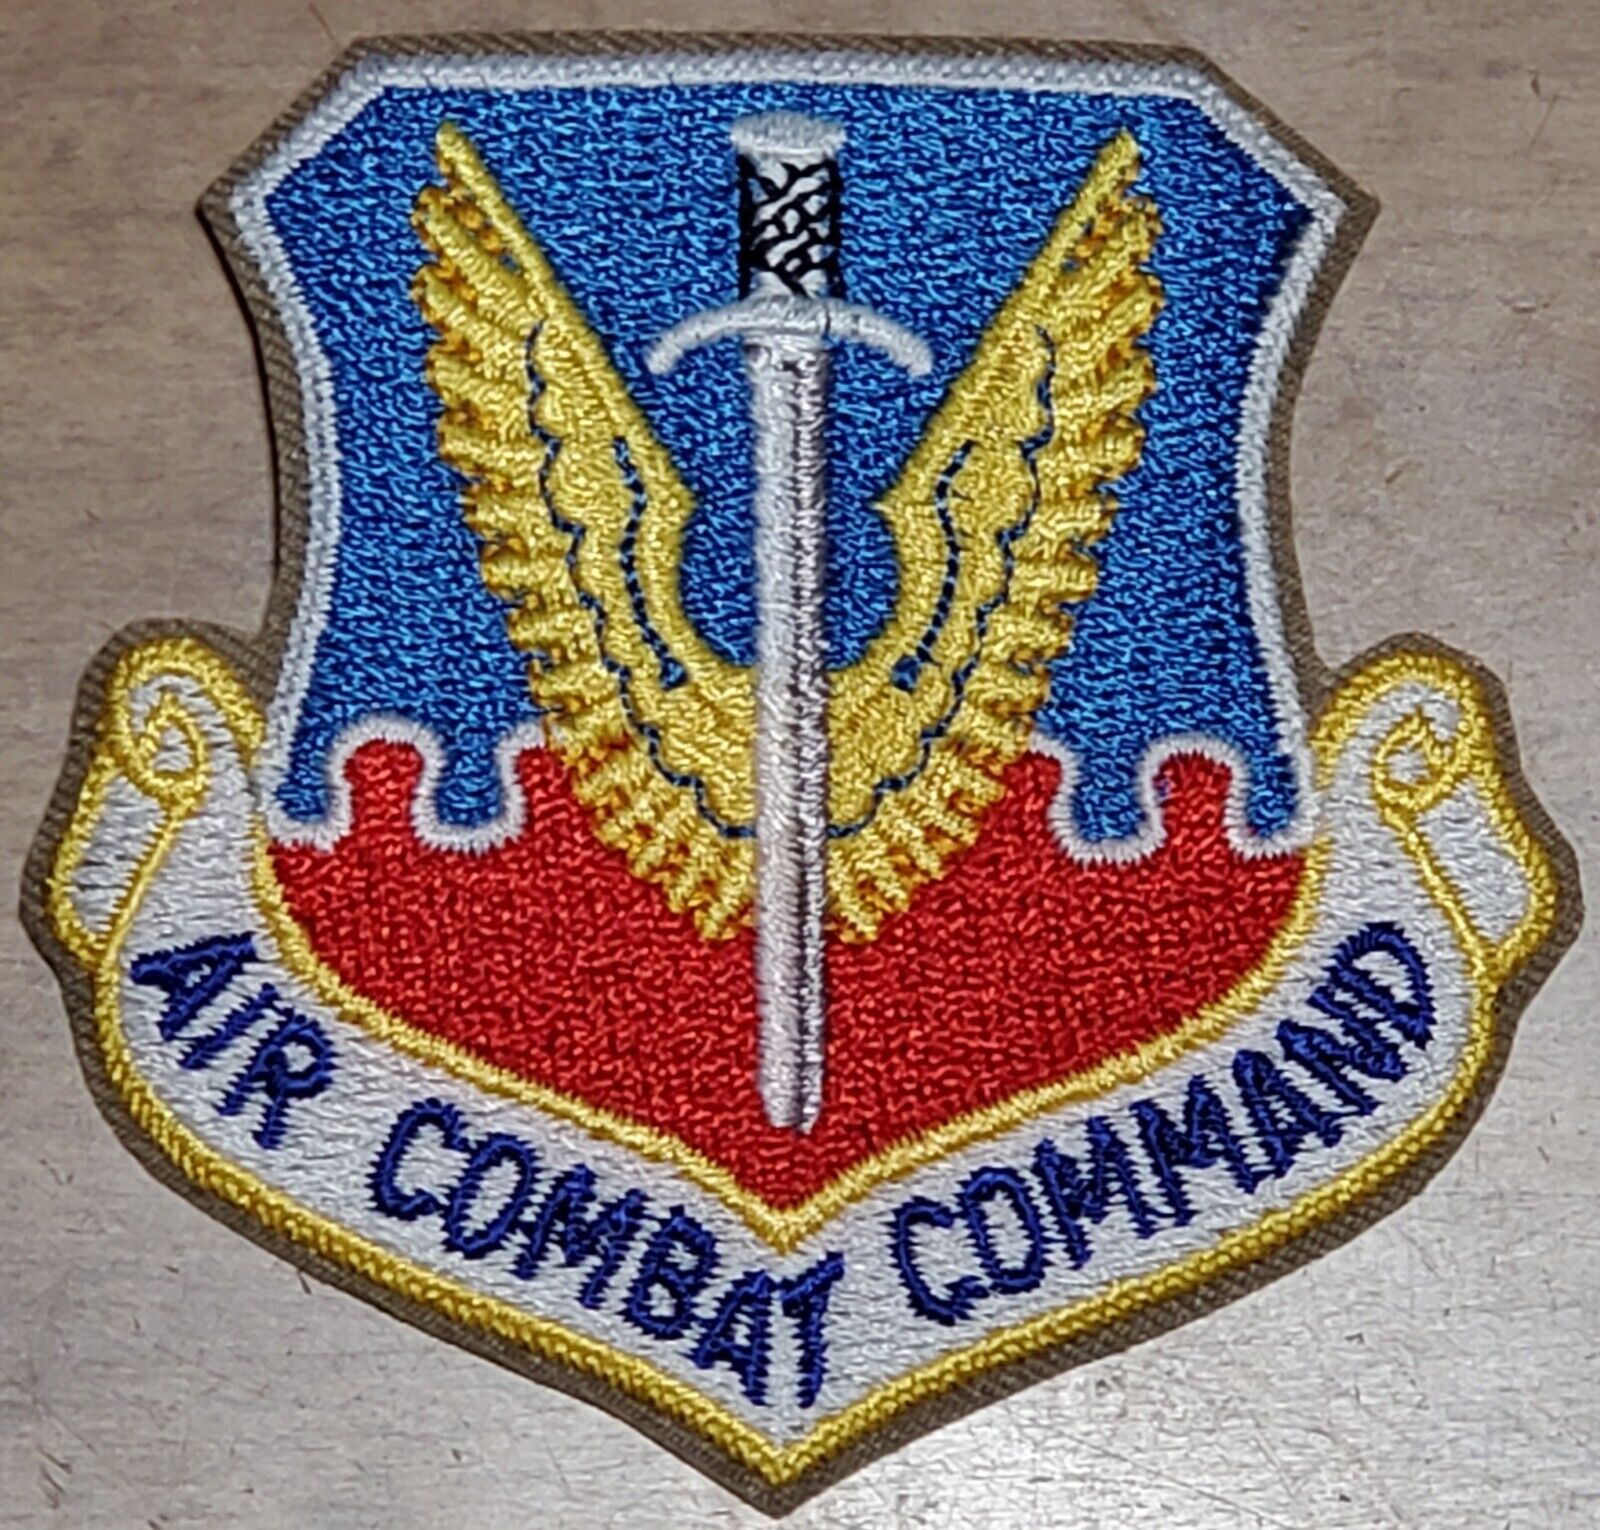 USAF AIR FORCE: AIR COMBAT COMMAND COLOR PATCH VINTAGE ORIGINAL MILITARY NEW